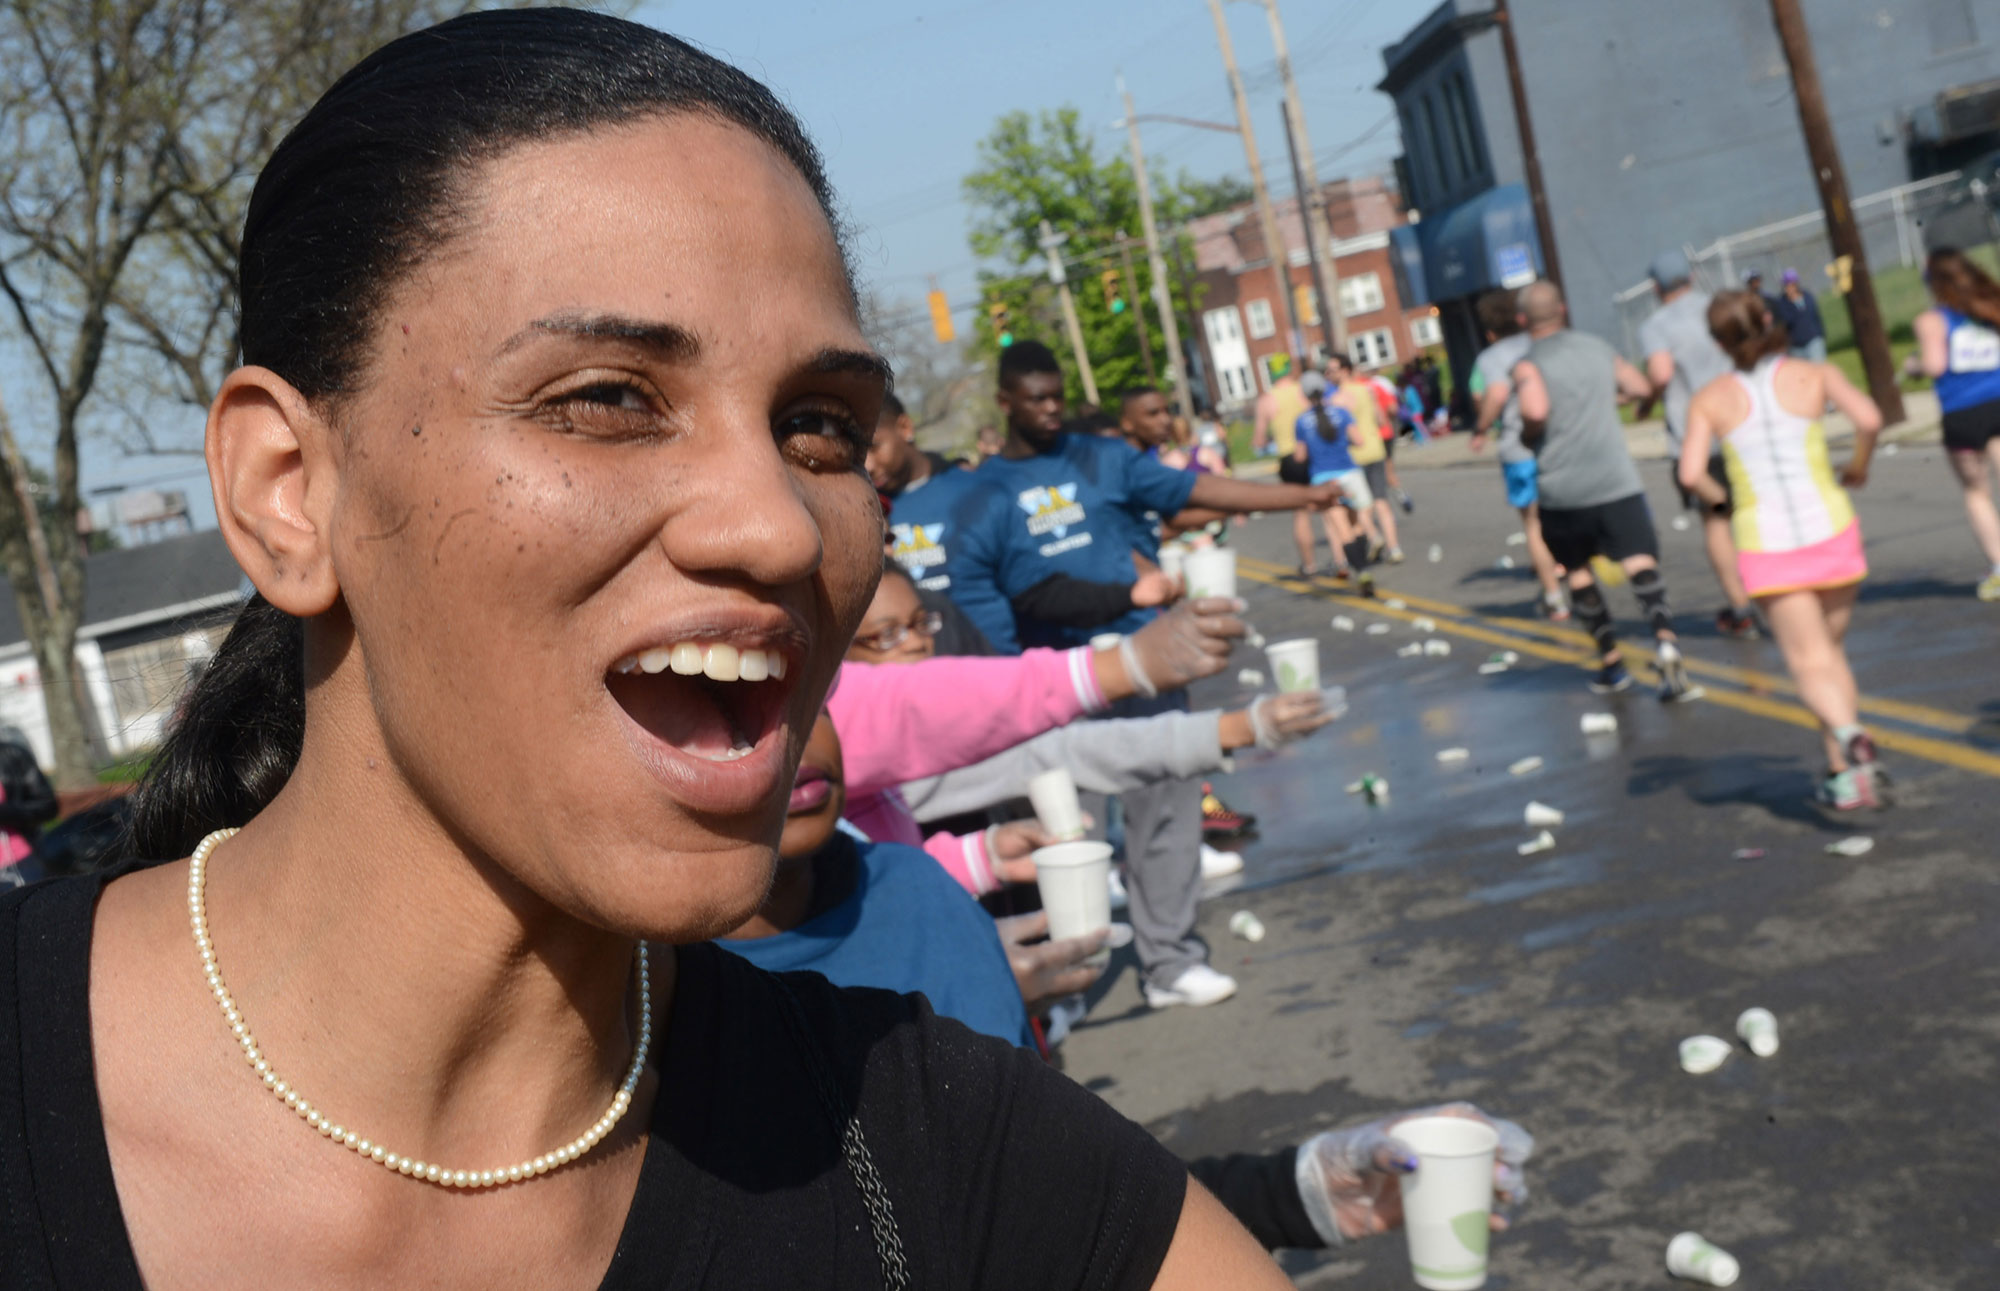 Volunteer Erica Motley cheers and hands water to runners as they make their way down Frankstown Avenue in Homewood. (Nate Guidry/Post-Gazette)